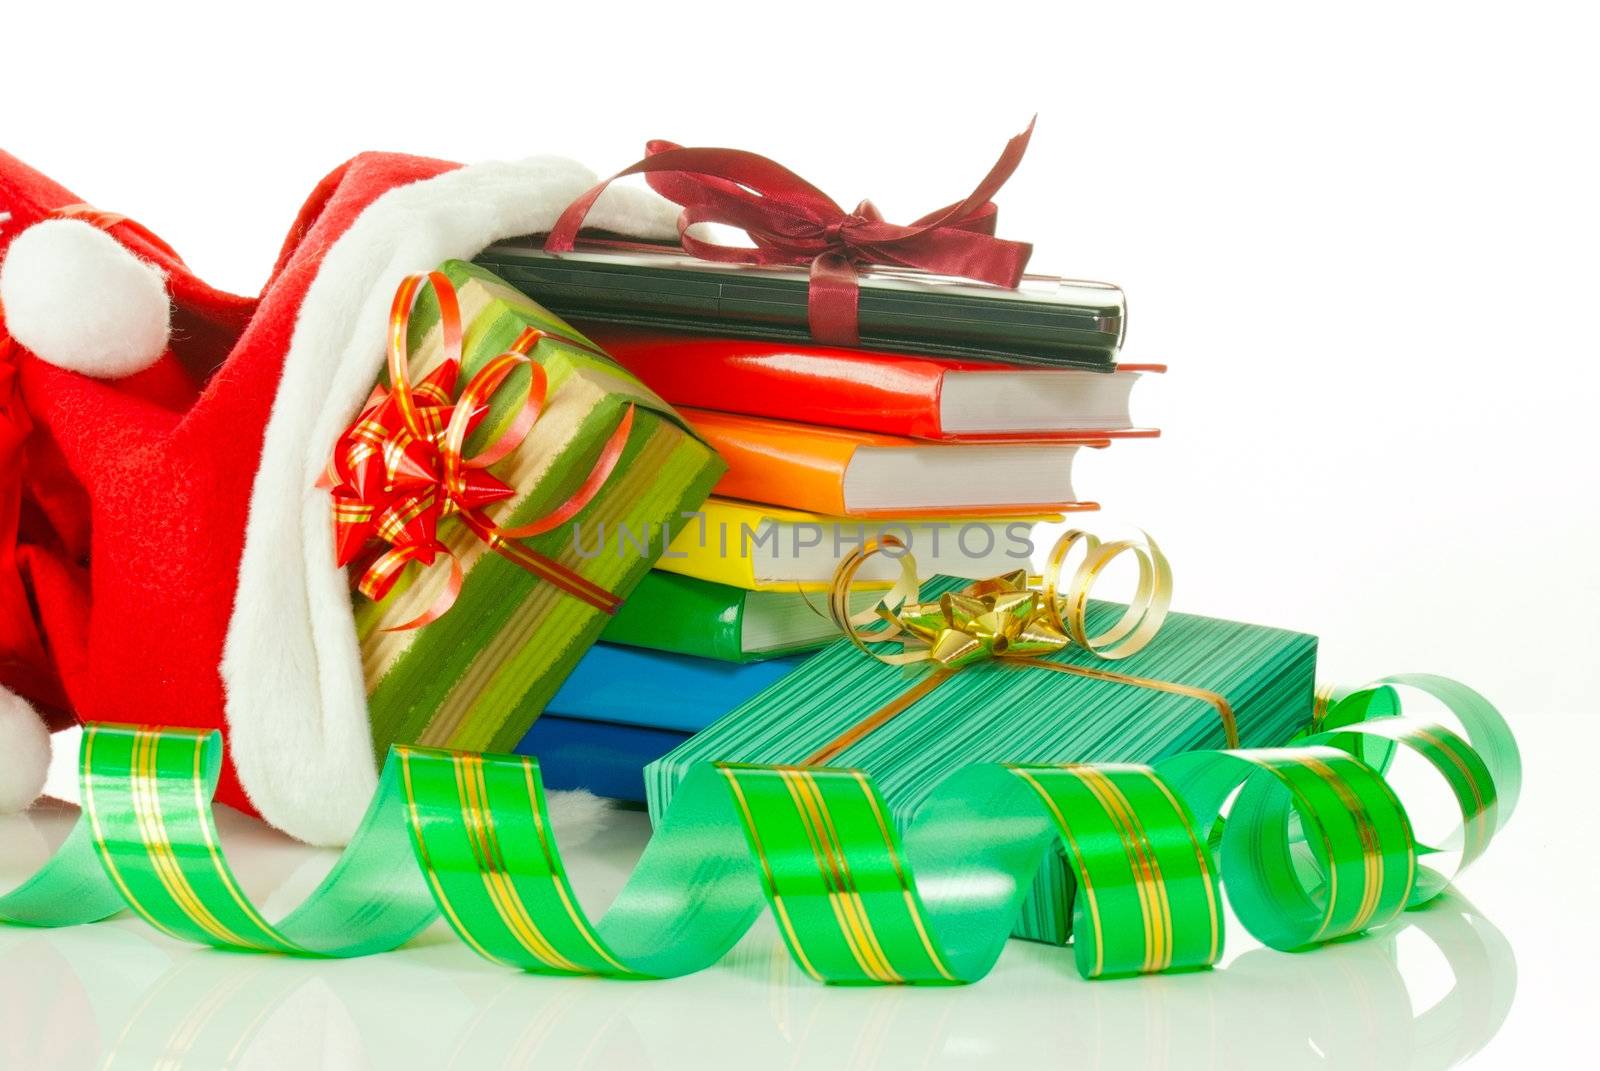 Christmas presents with e-book reader and books in bag against white background